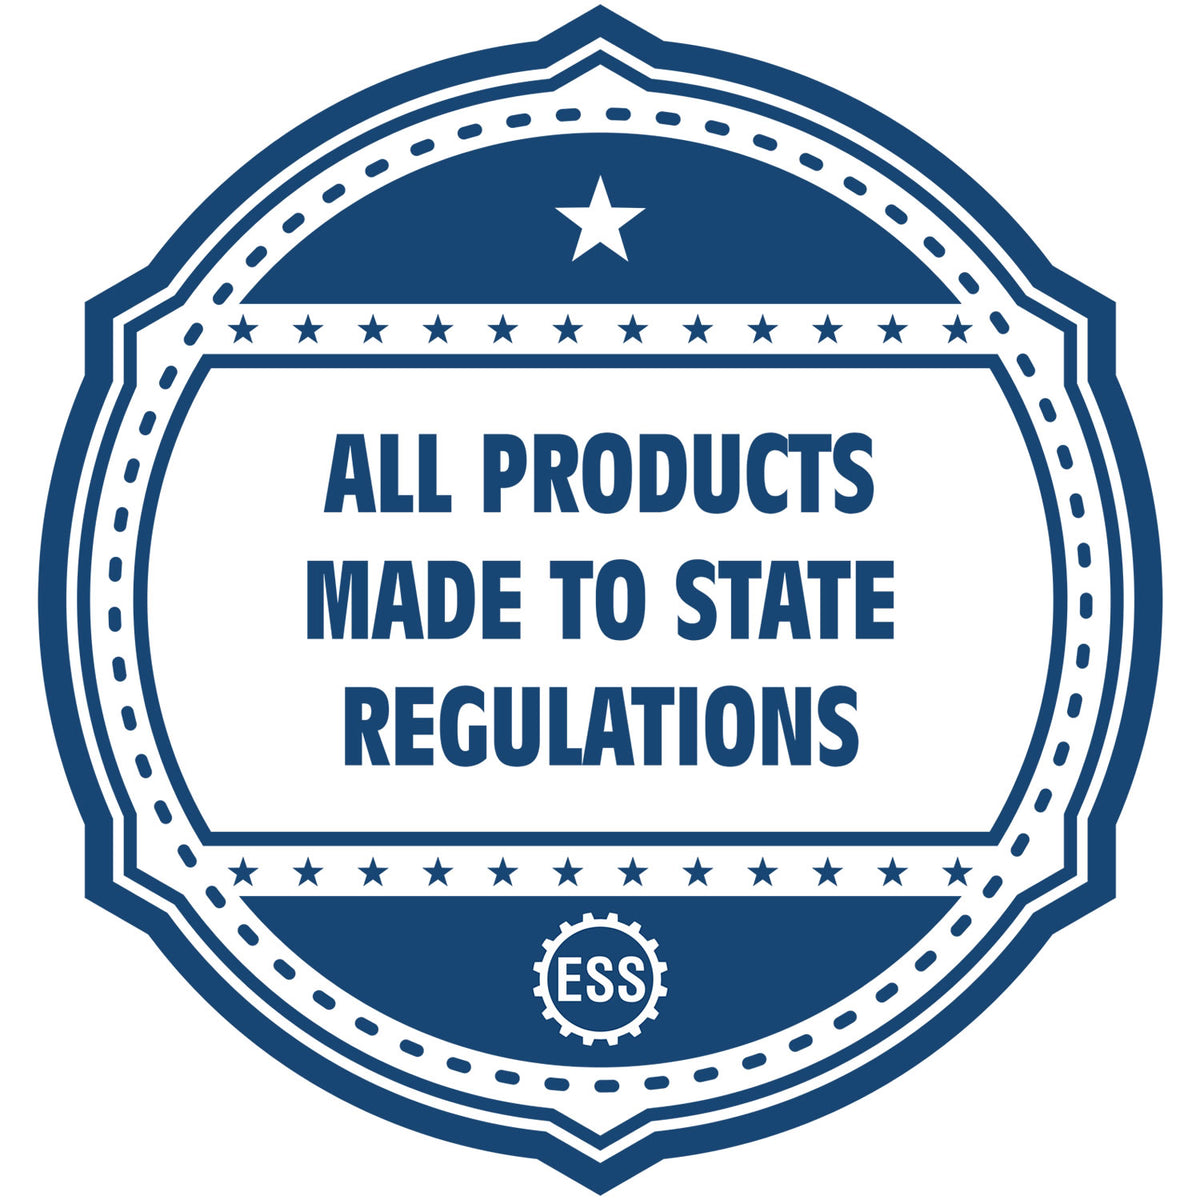 An icon or badge element for the Arizona Engineer Desk Seal showing that this product is made in compliance with state regulations.